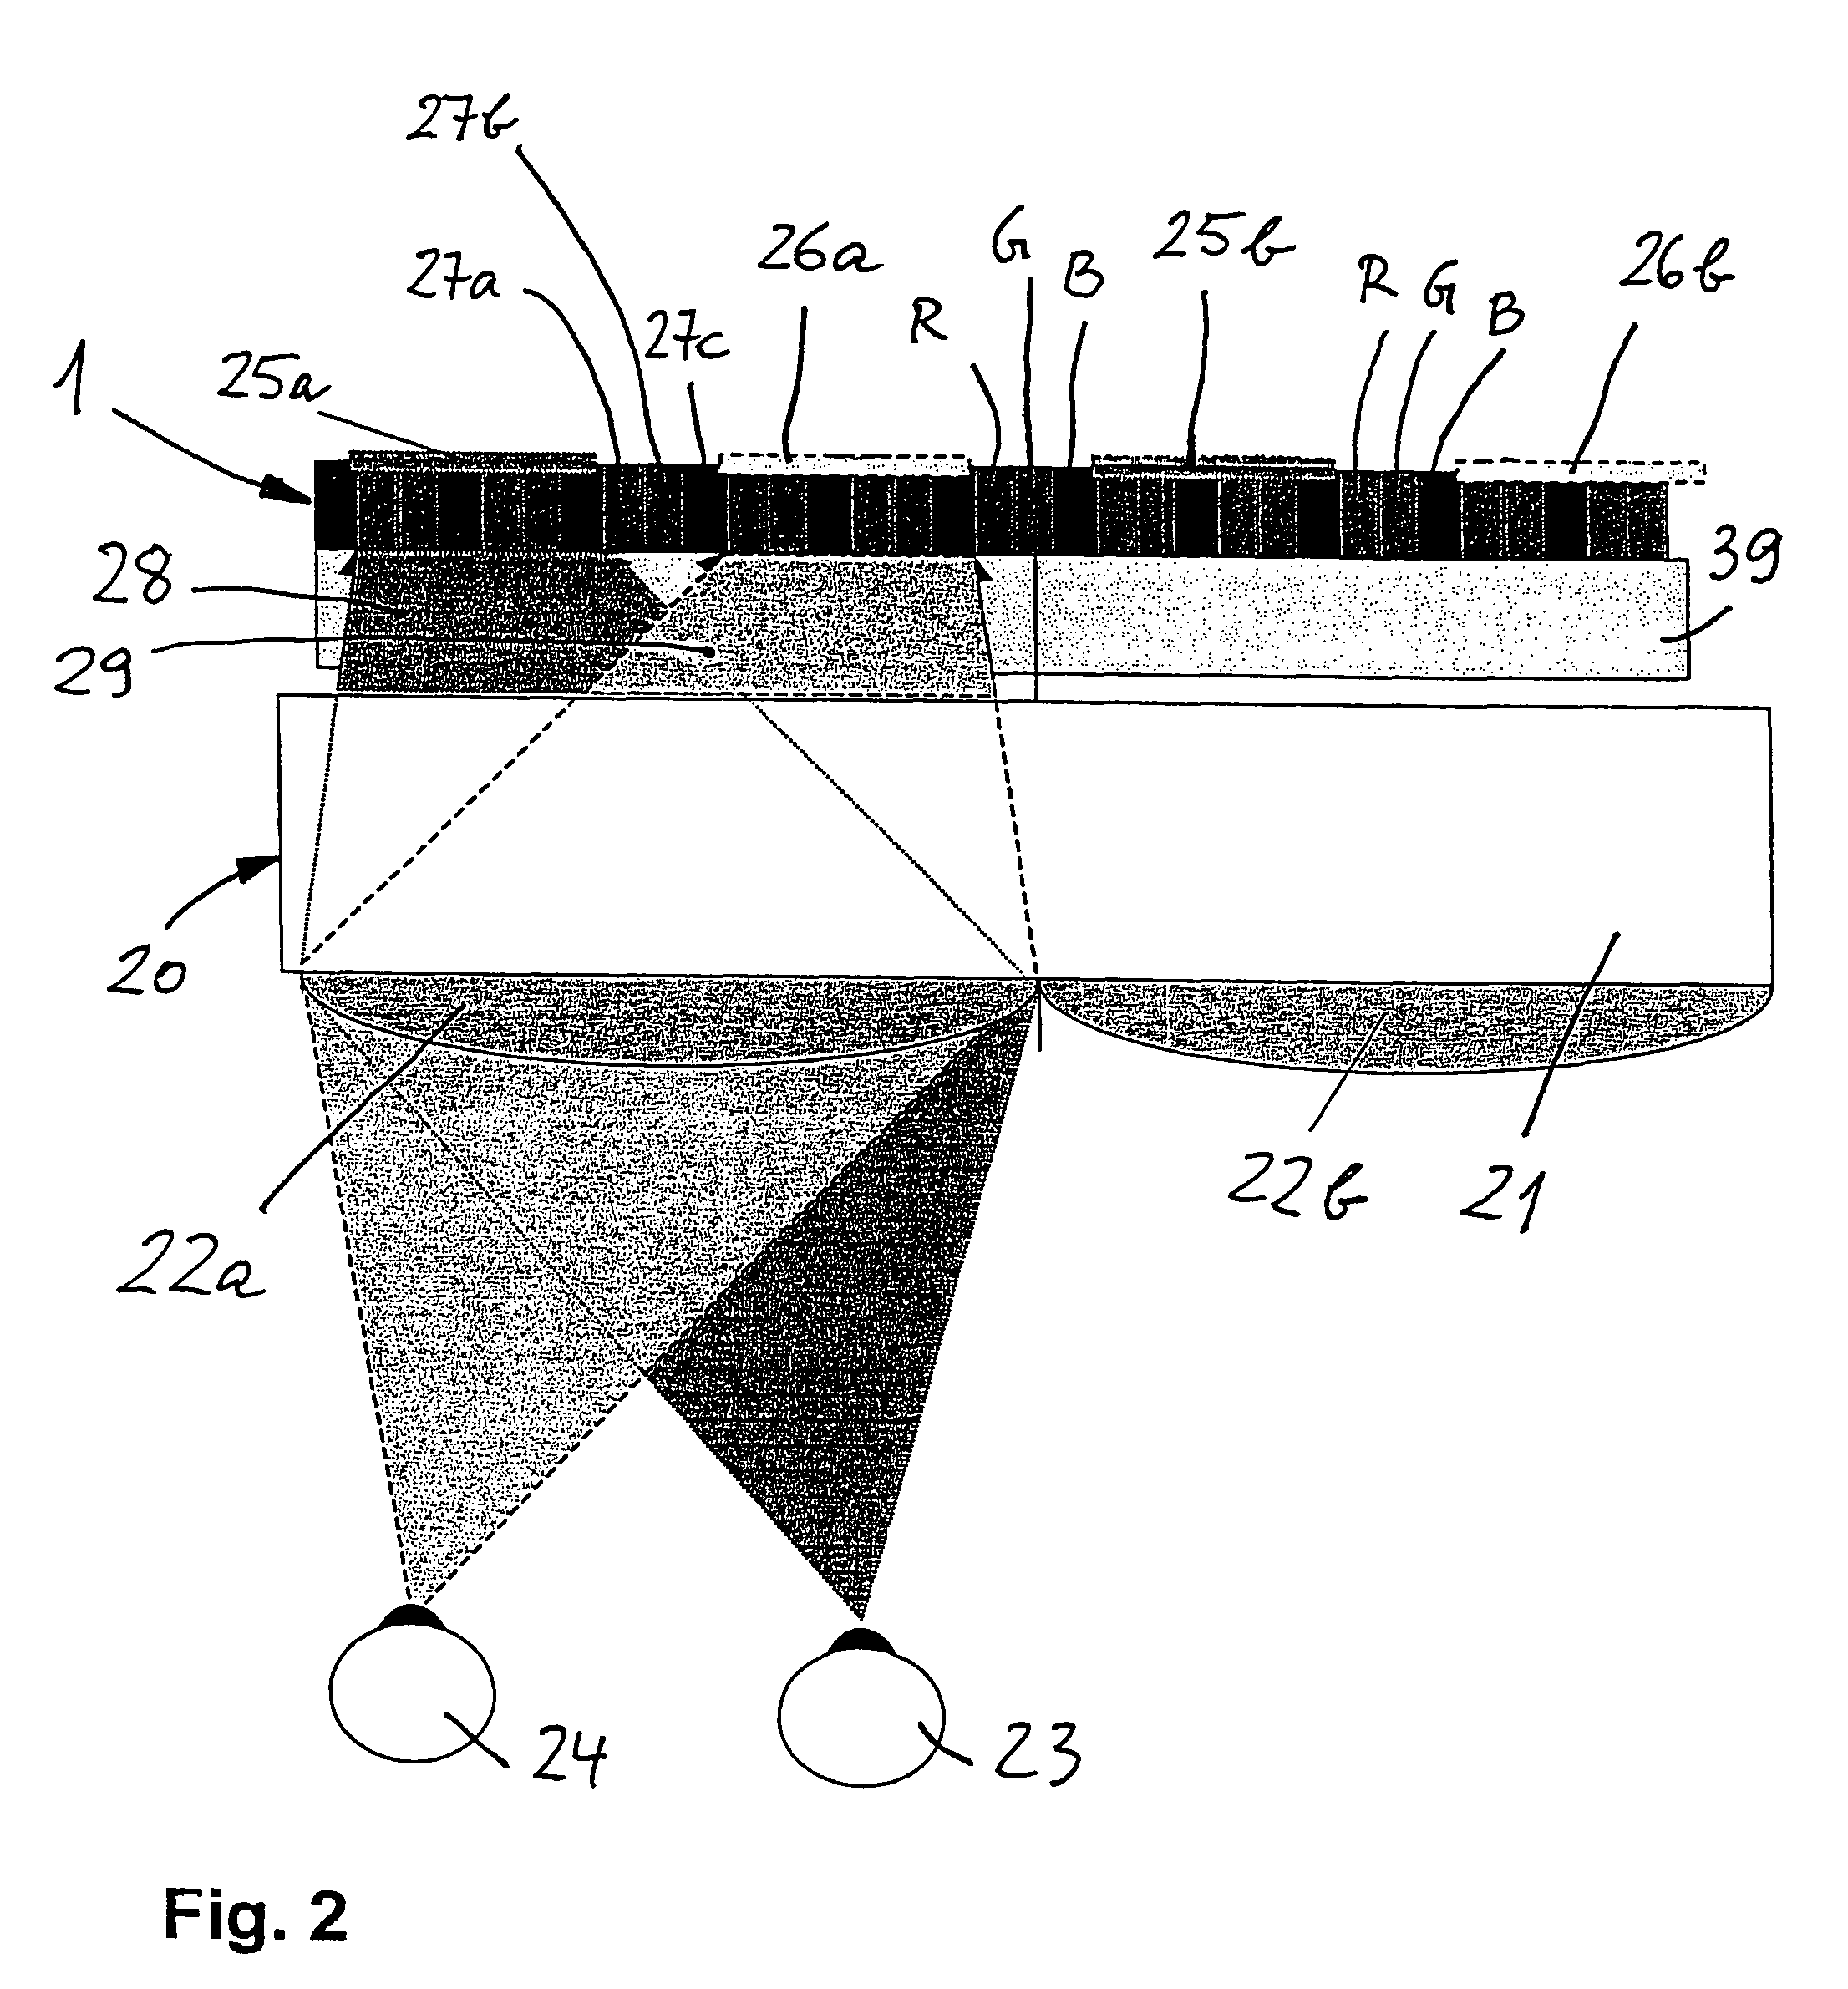 Autostereoscopic reproduction system for 3-D displays